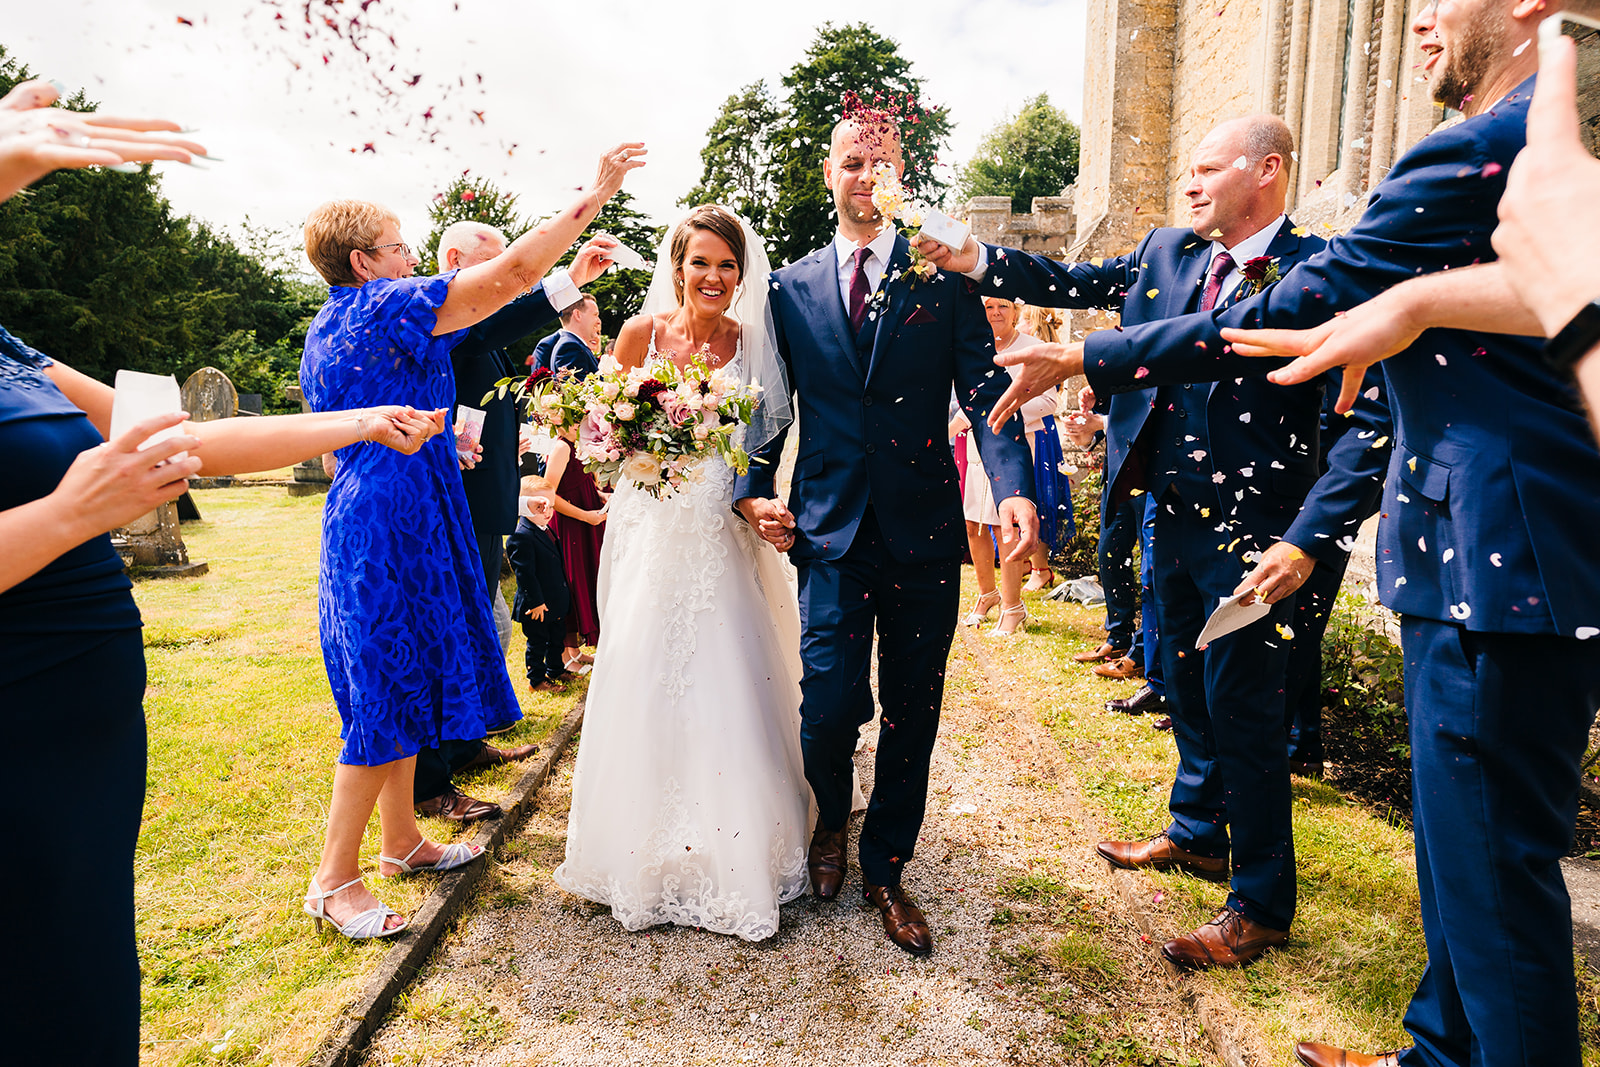 Bride and groom get covered in confetti after their wedding ceremony
